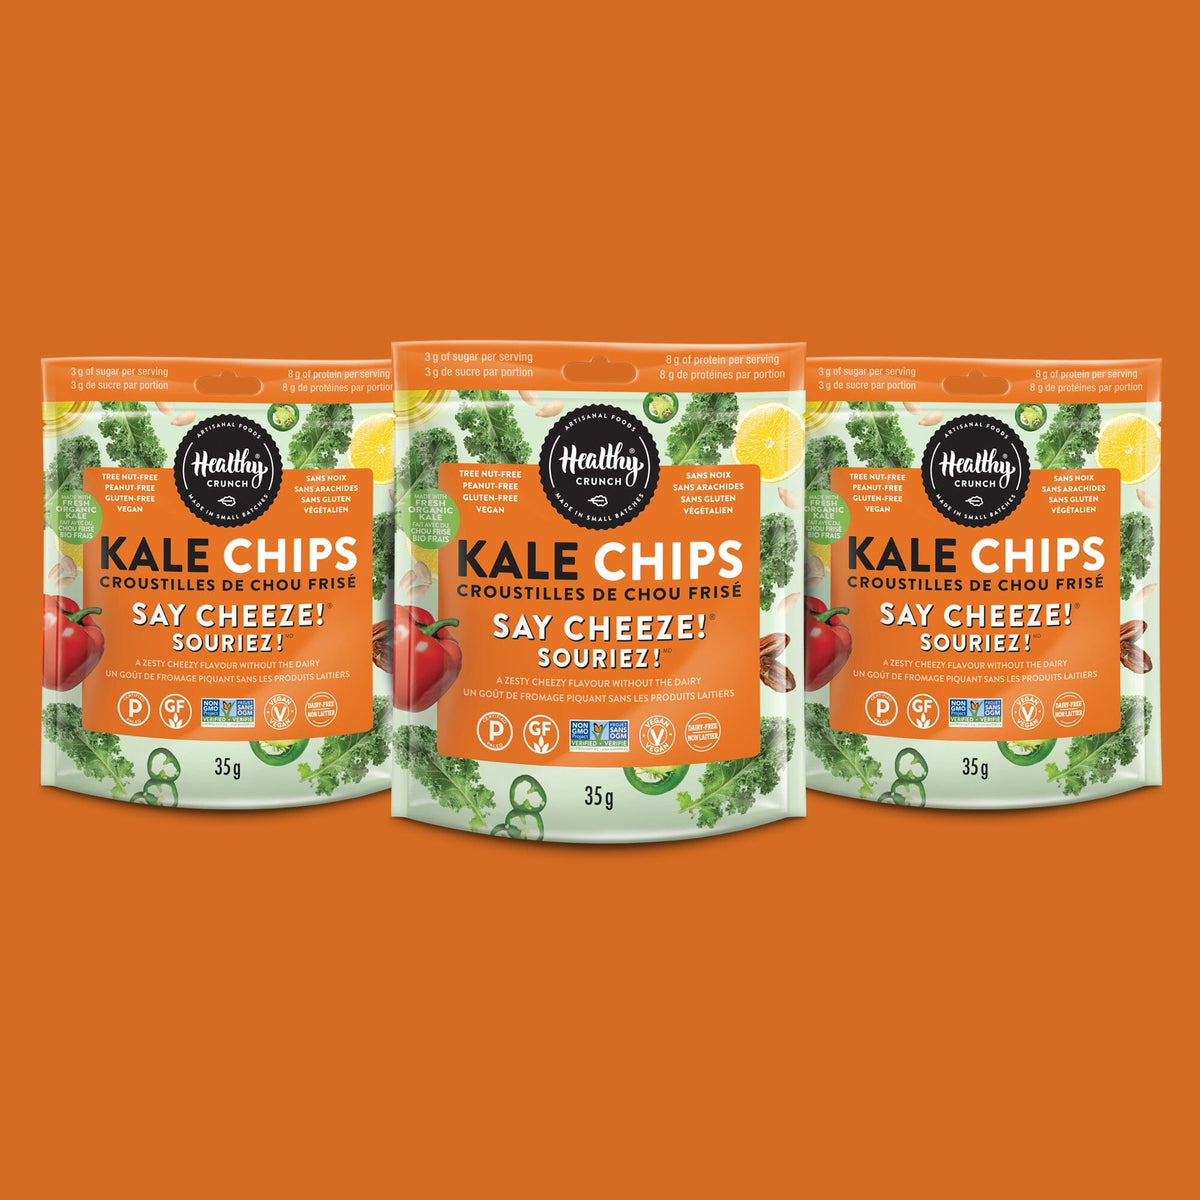 Say Cheeze! Kale Chips